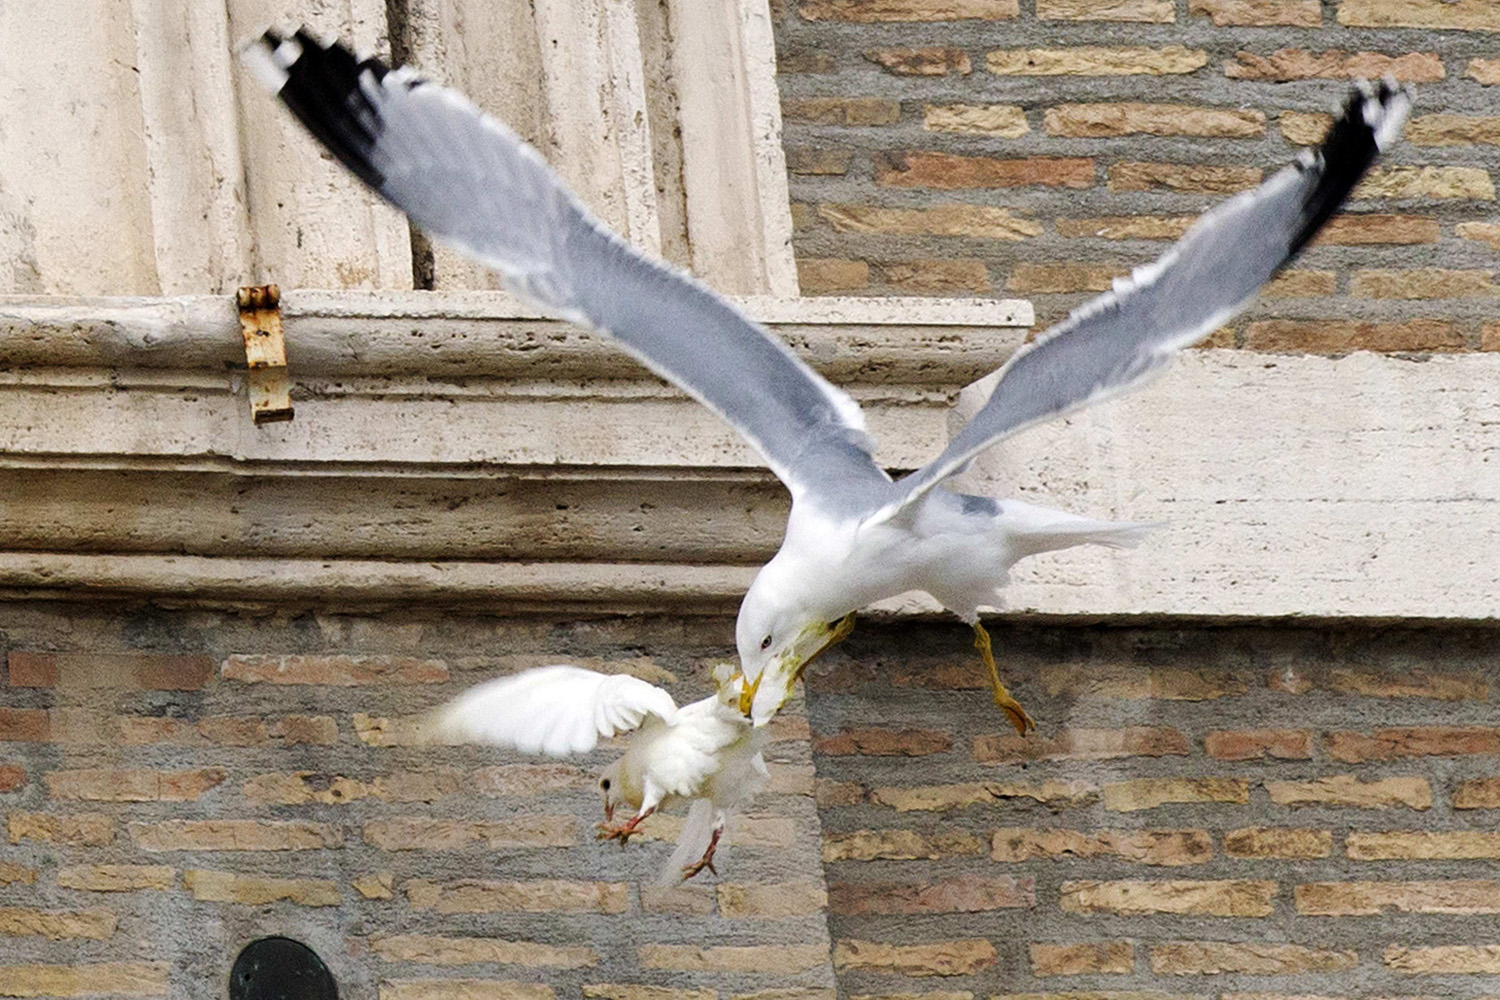 A dove released during an Angelus prayer conducted by Pope Francis, is attacked by a seagull at the Vatican